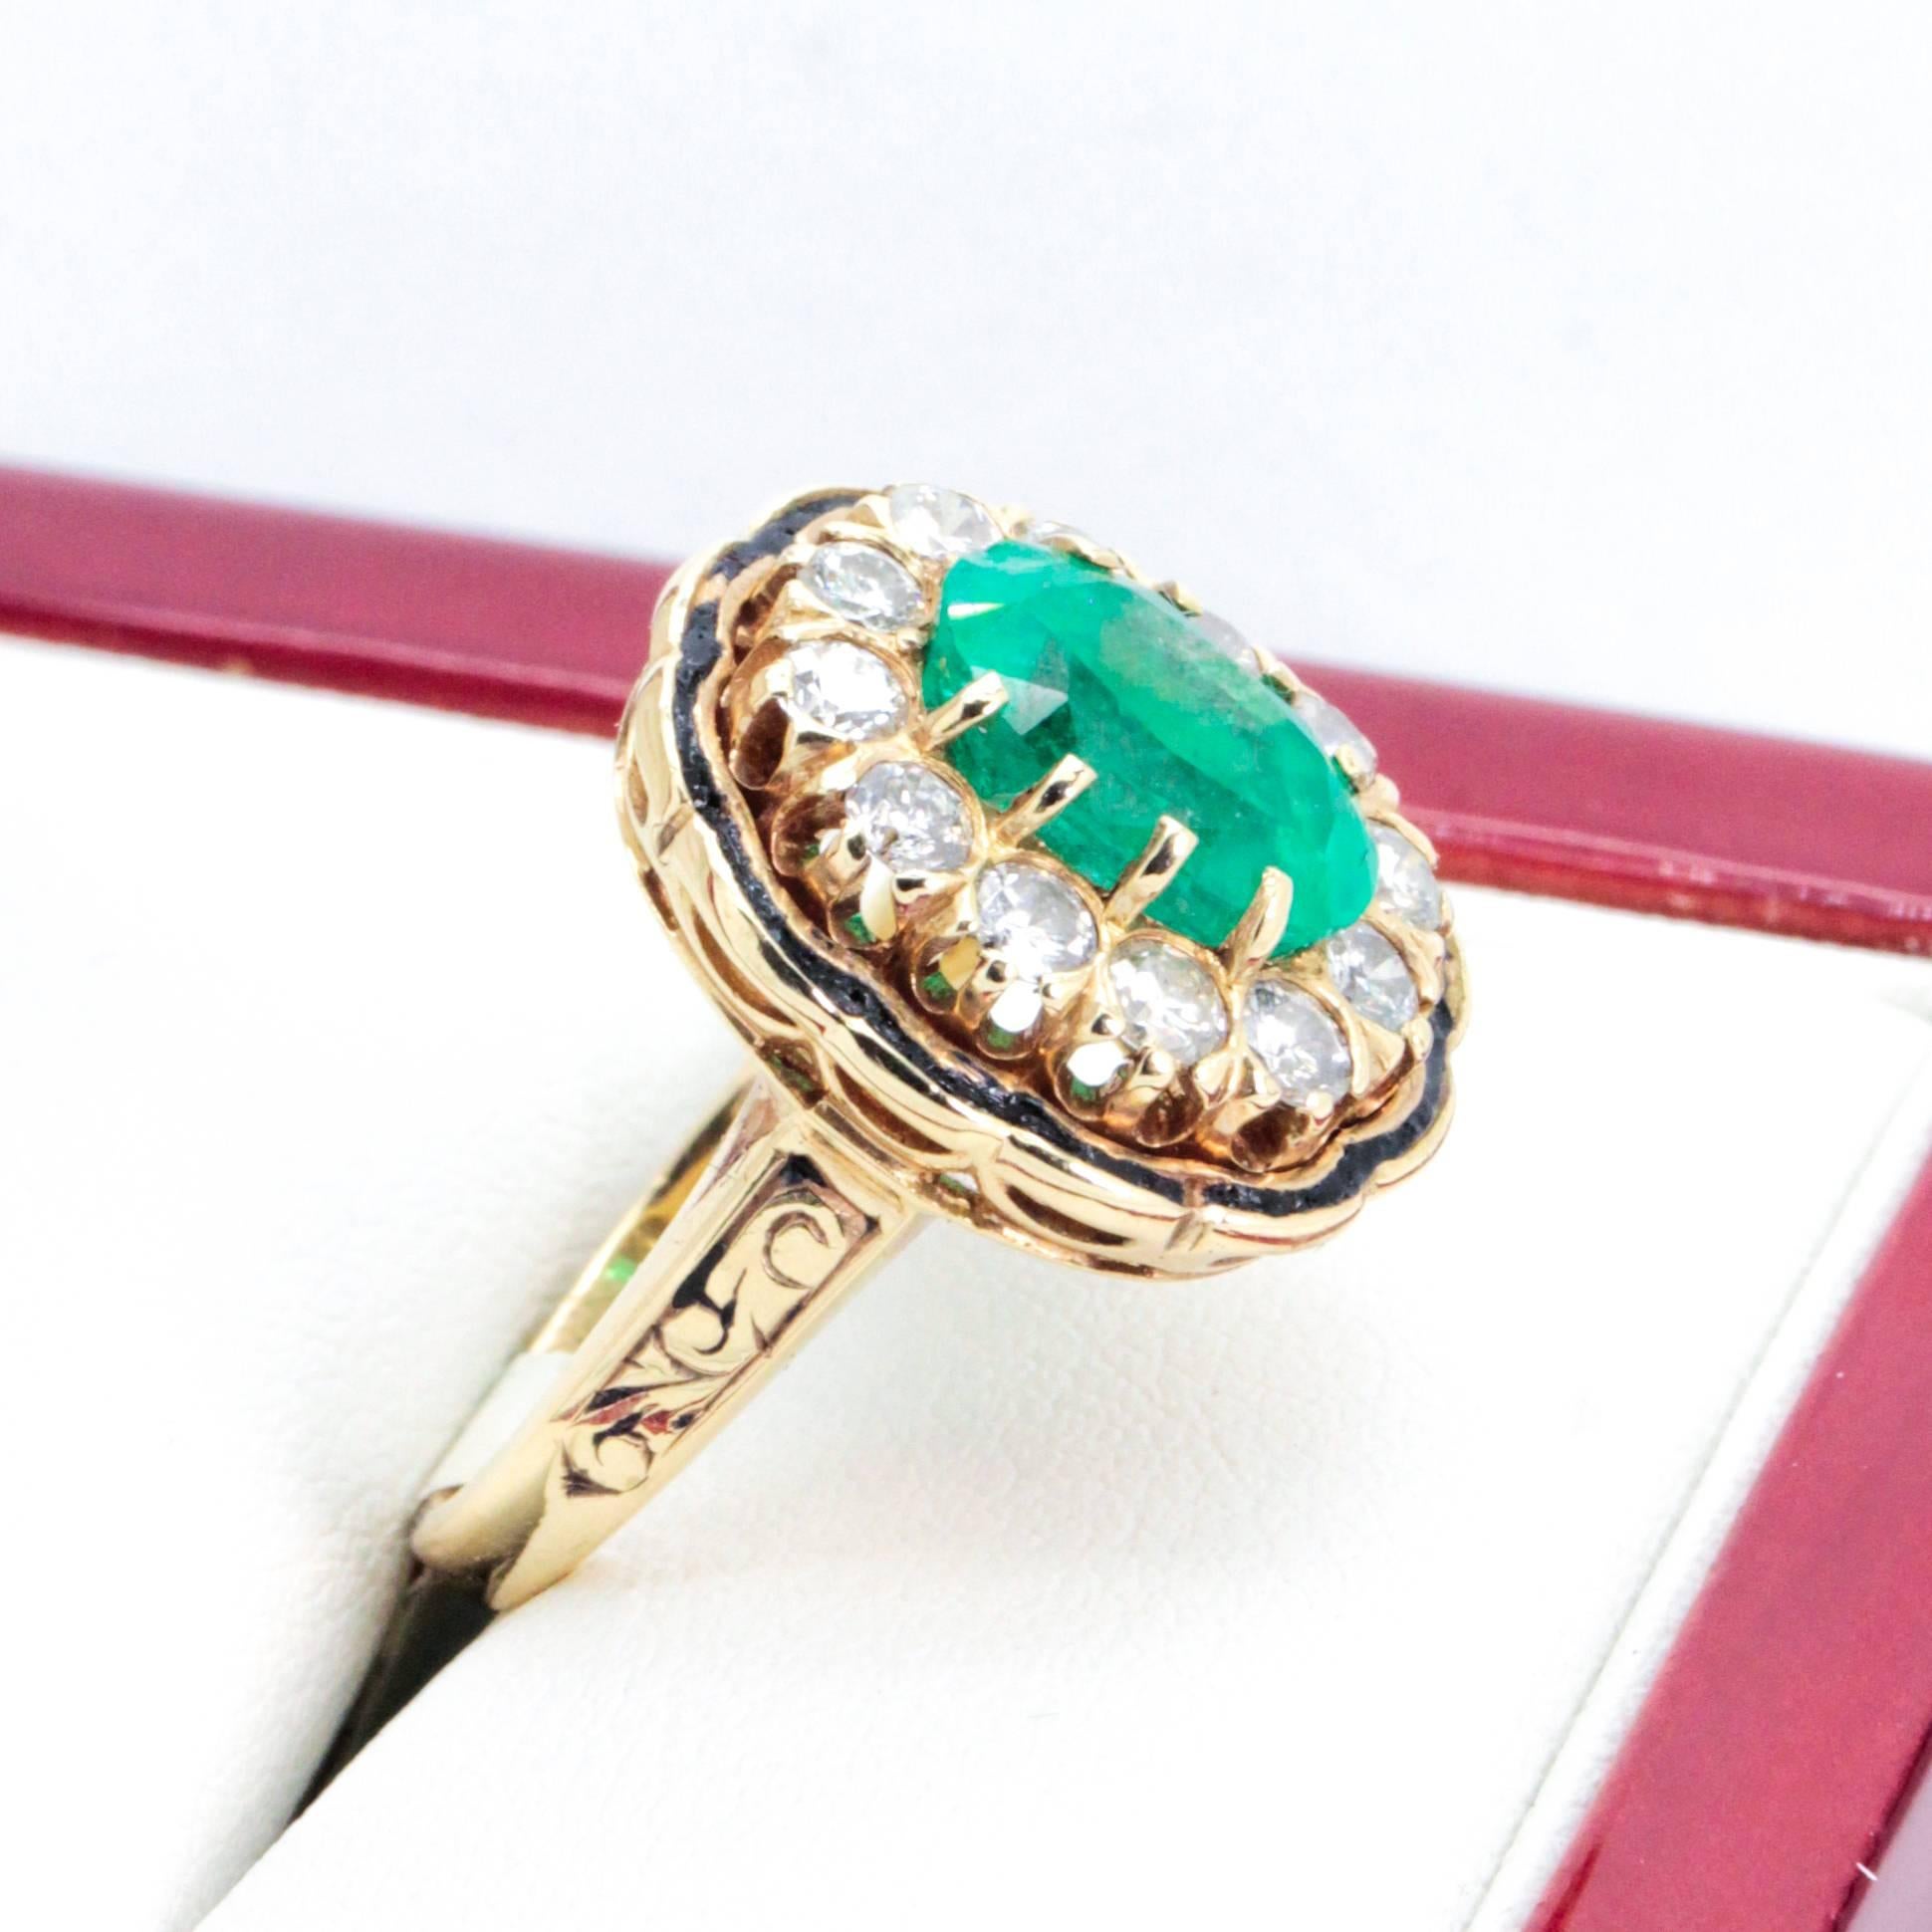 Vintage Emerald and Diamond Cluster Cocktail Ring In Excellent Condition For Sale In Sydney CBD, AU